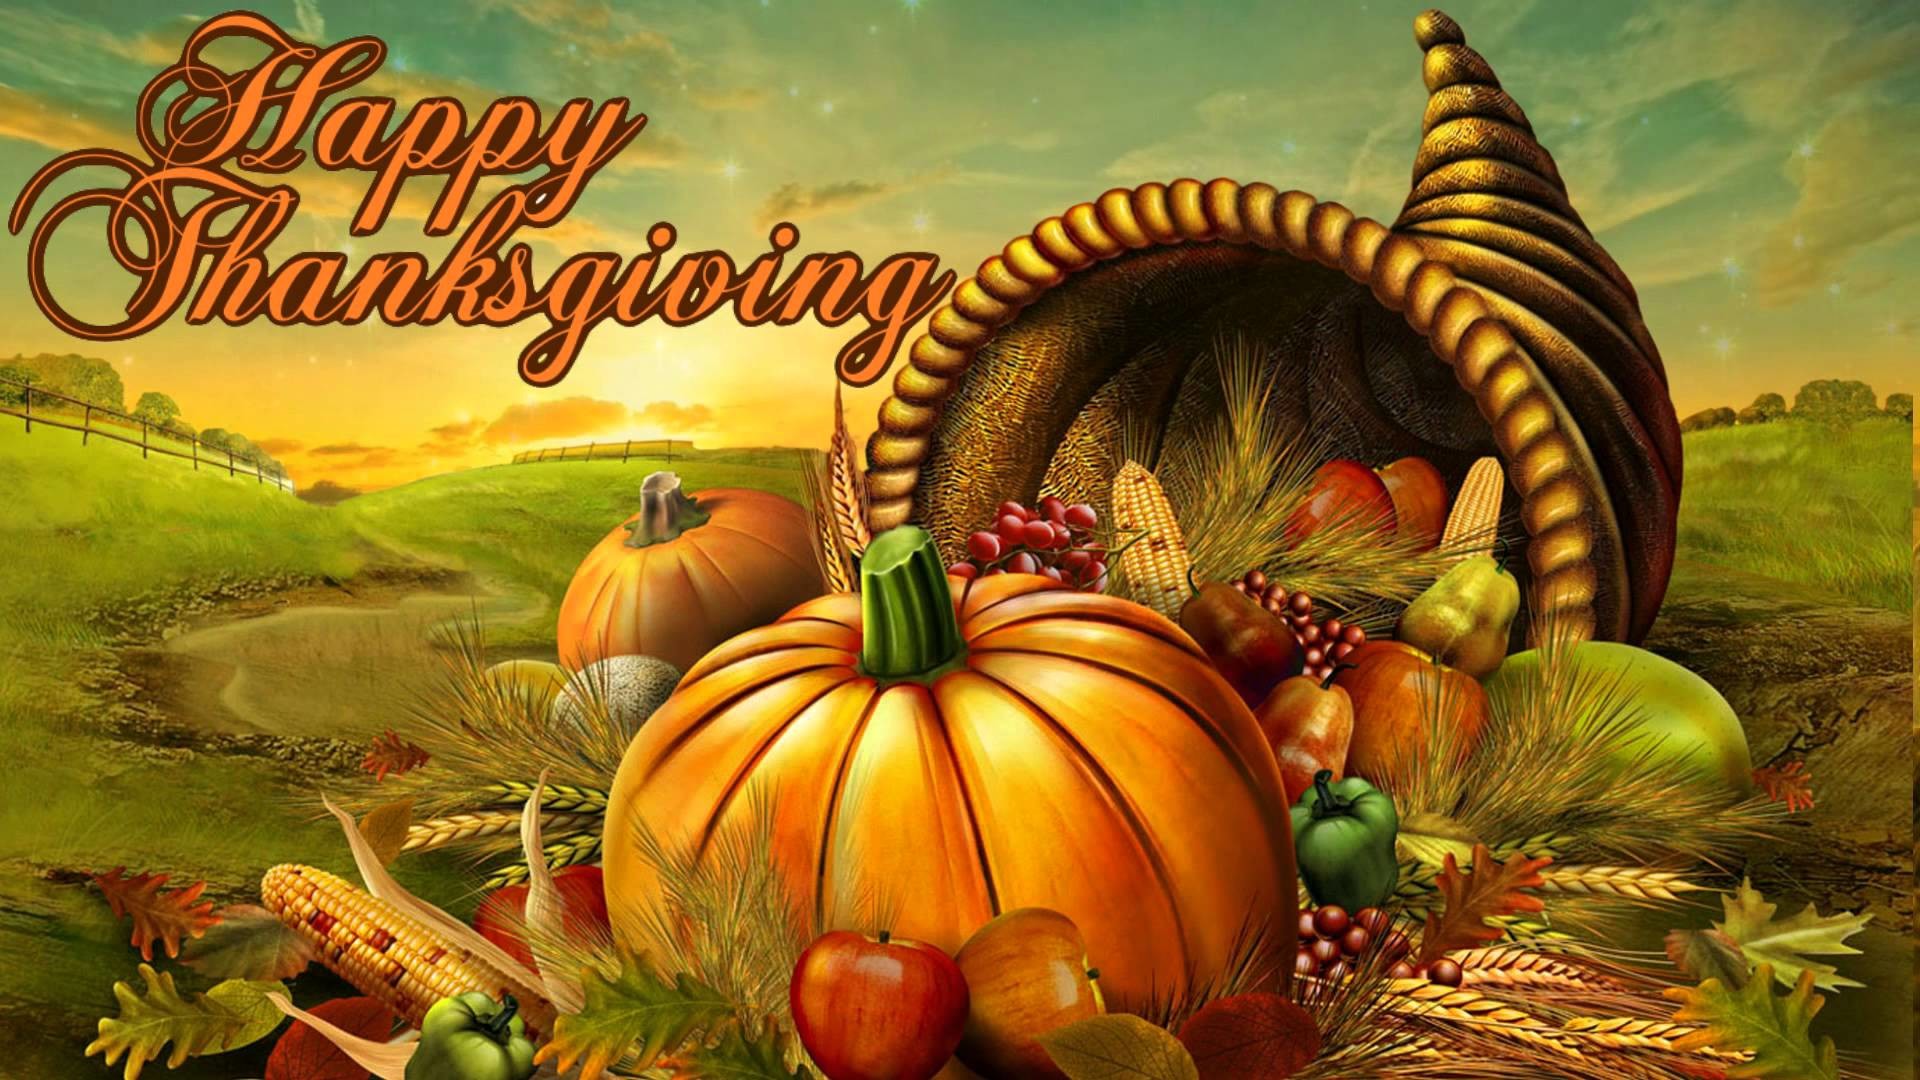 1920x1080 Thanksgiving - Free Creative Commons background video 1080p HD stock video  footage - YouTube